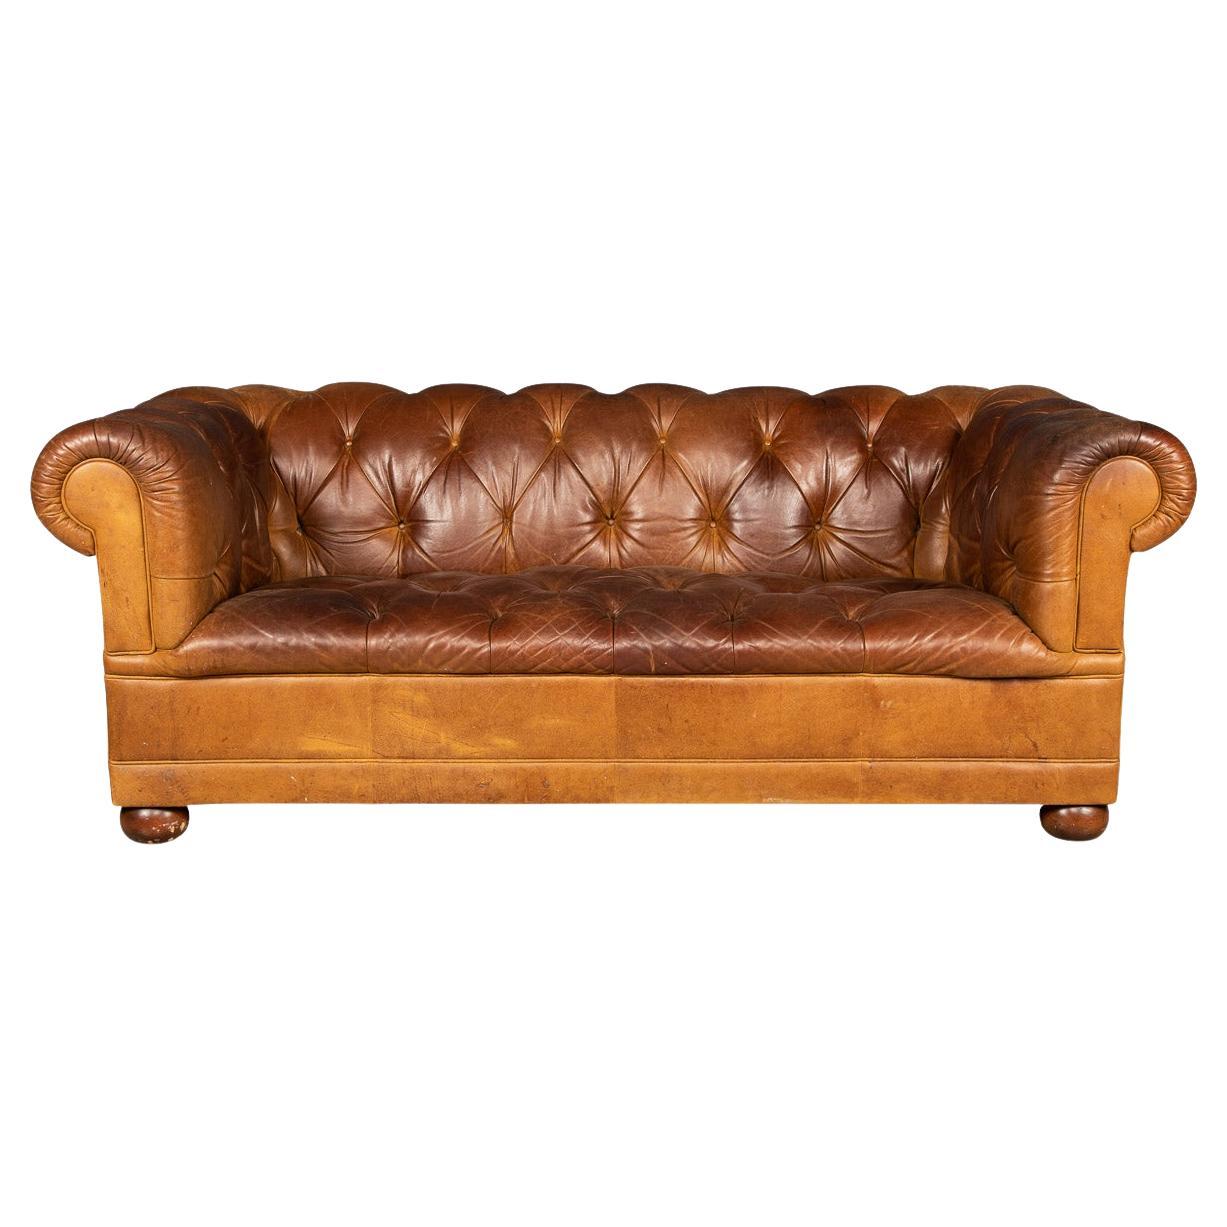 20th Century Chesterfield Leather Sofa By Laura Ashley, England, c.1970